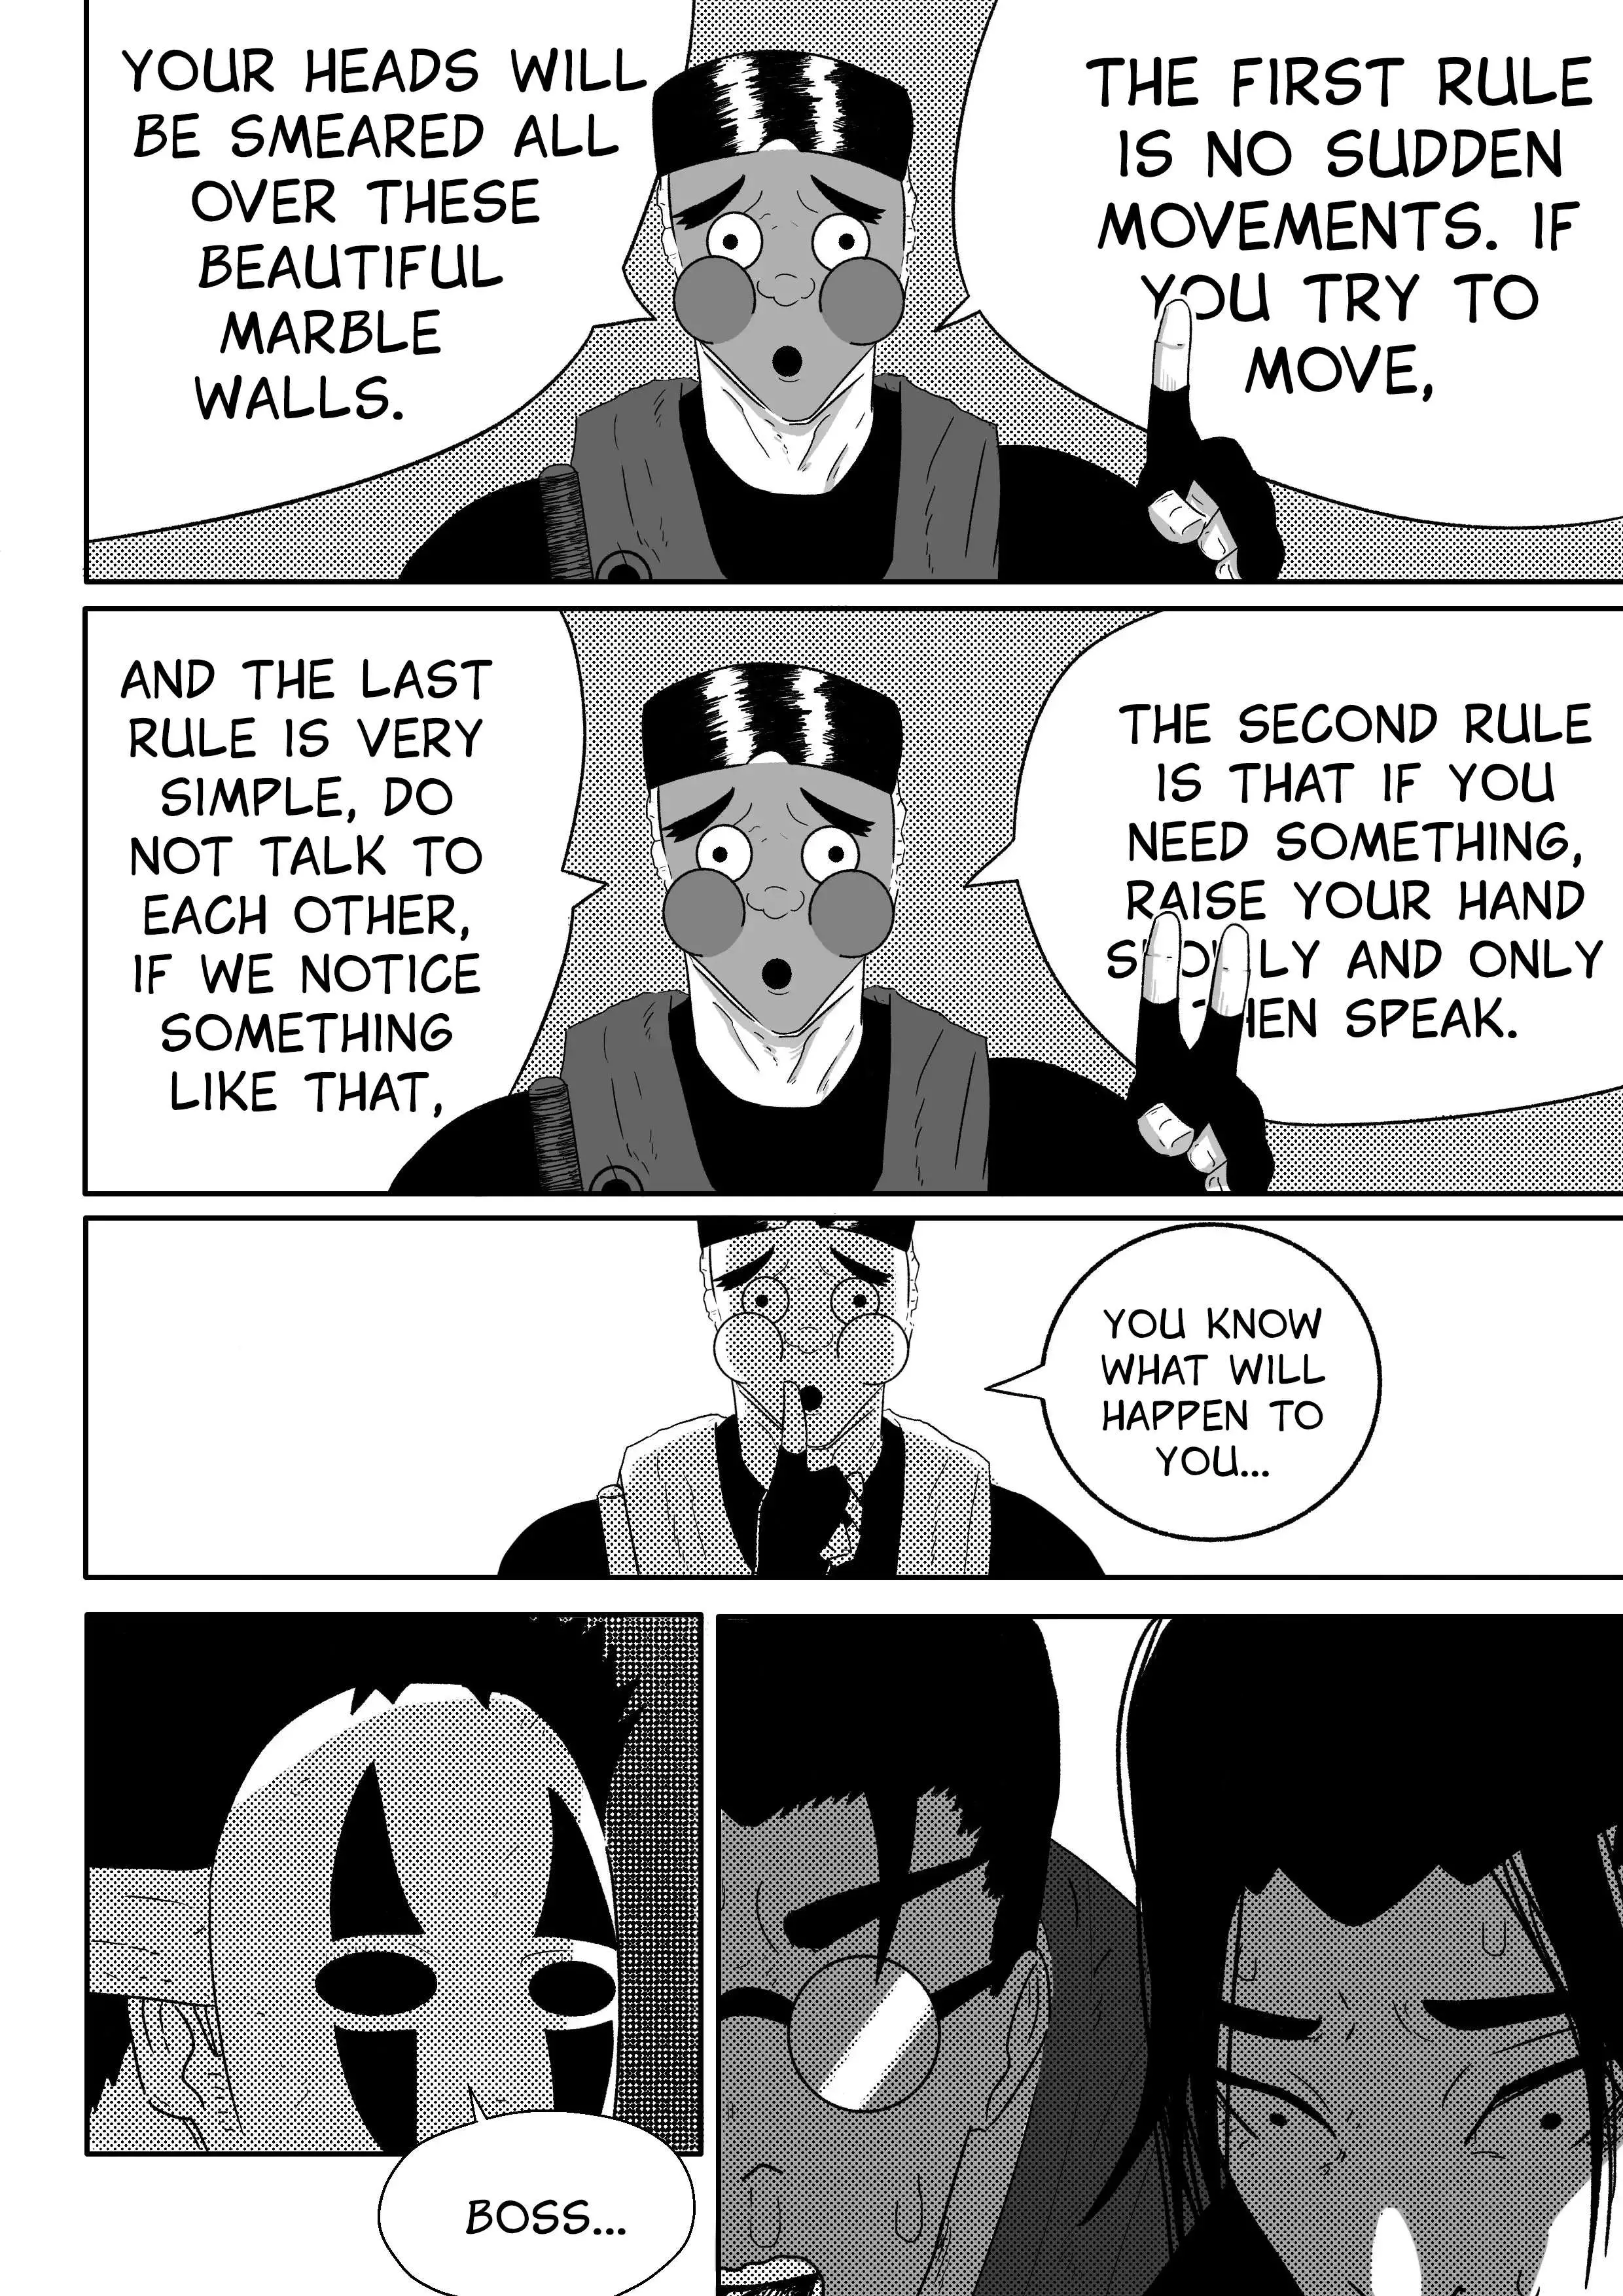 Demon's Legacy - 3 page 6-ca089c0f